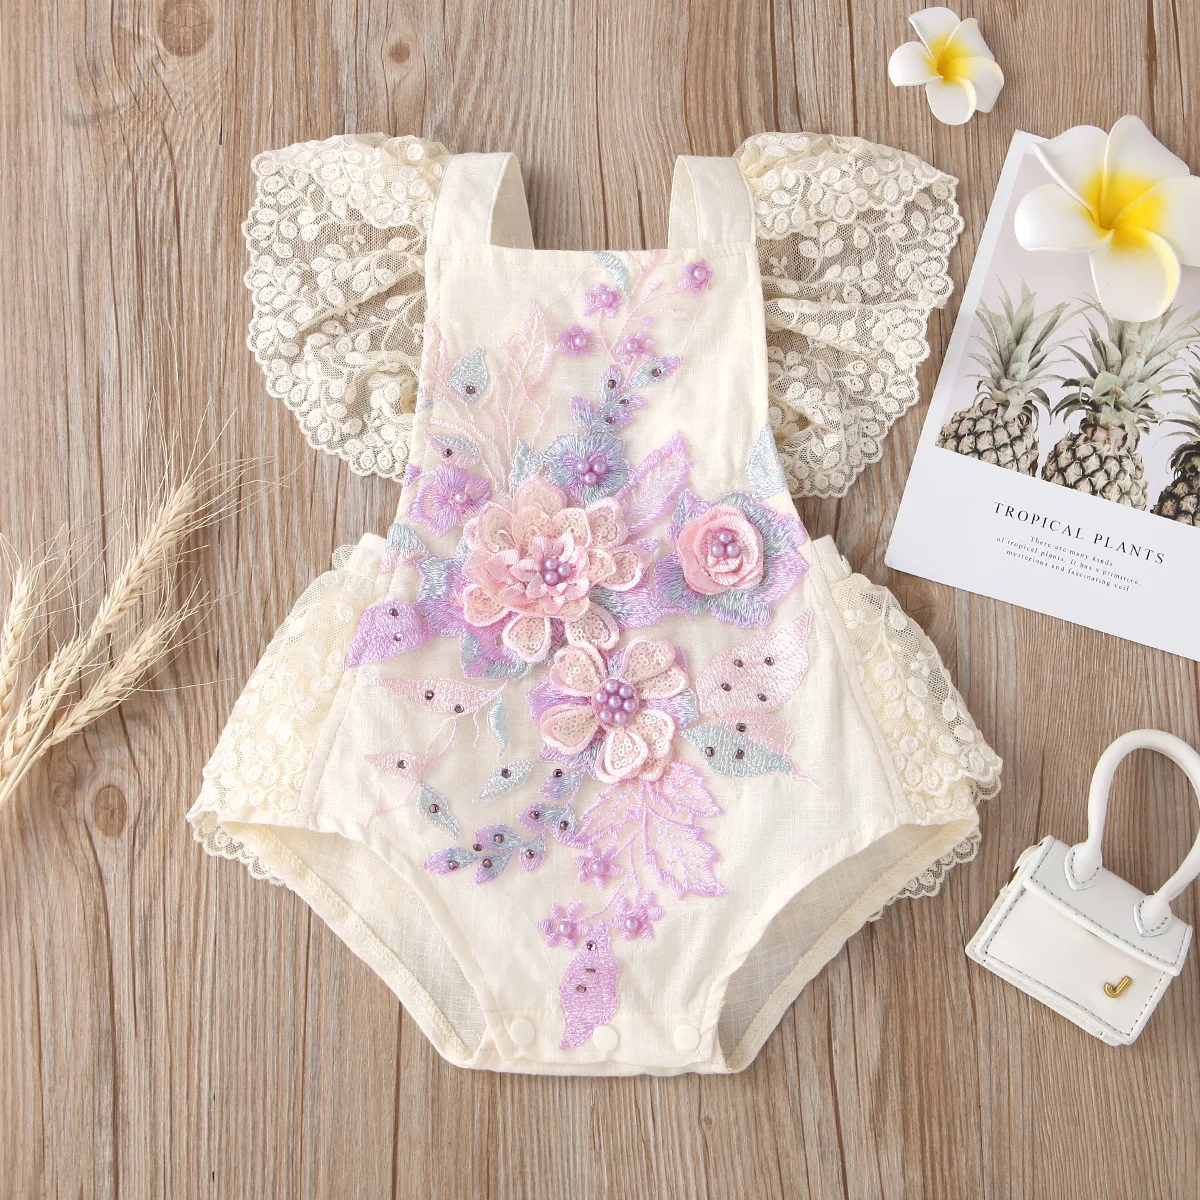 

2021 New Summer Infant Sleeveless Lace Ruffle Bodysuit with Flowers Baby Girl Baptism Onesie 0-2 Years, As photos